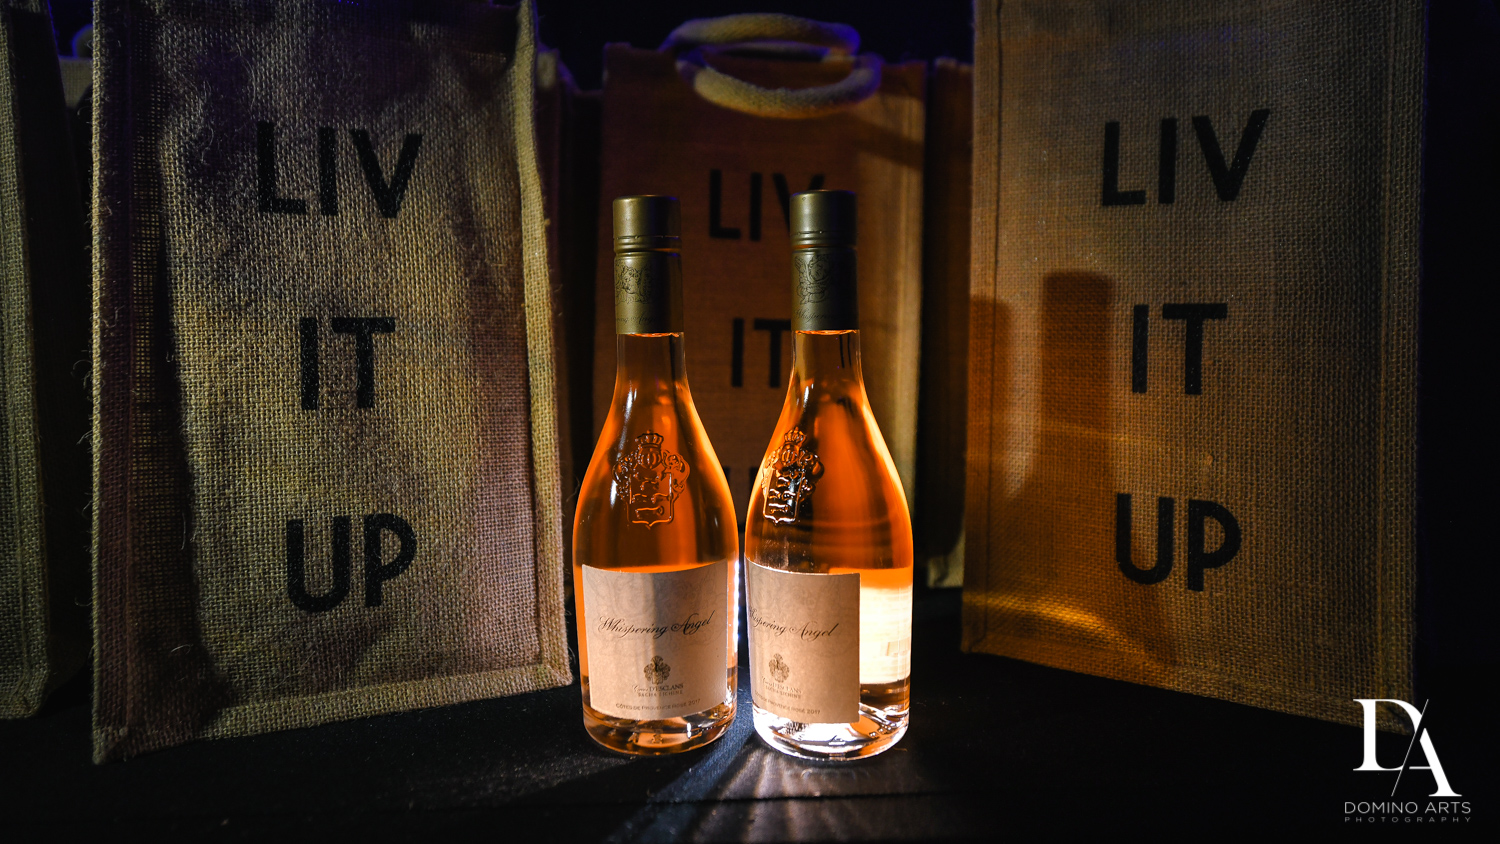 LIV IT UP party favors at Nightclub Bat Mitzvah at LIV in Fontainebleau Miami by Domino Arts Photography